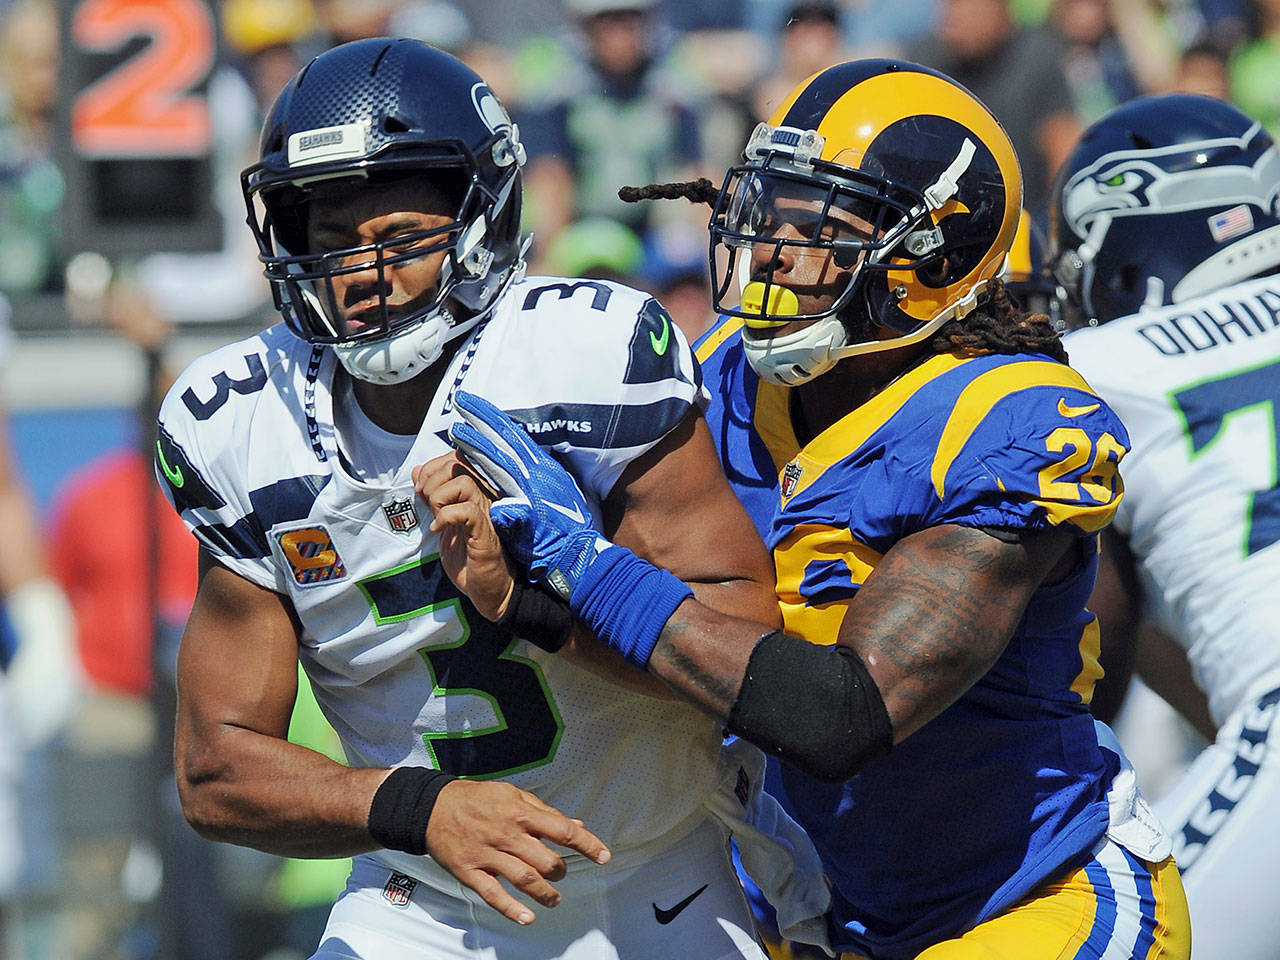 Seahawks quarterback (3) Russell Wilson gets hit after a pass by Rams linebacker (26) Mark Barron during the first quarter of a game Oct. 8, 2017, at the Los Angeles Memorial Coliseum in Los Angeles. (AP Photo/John Cordes)